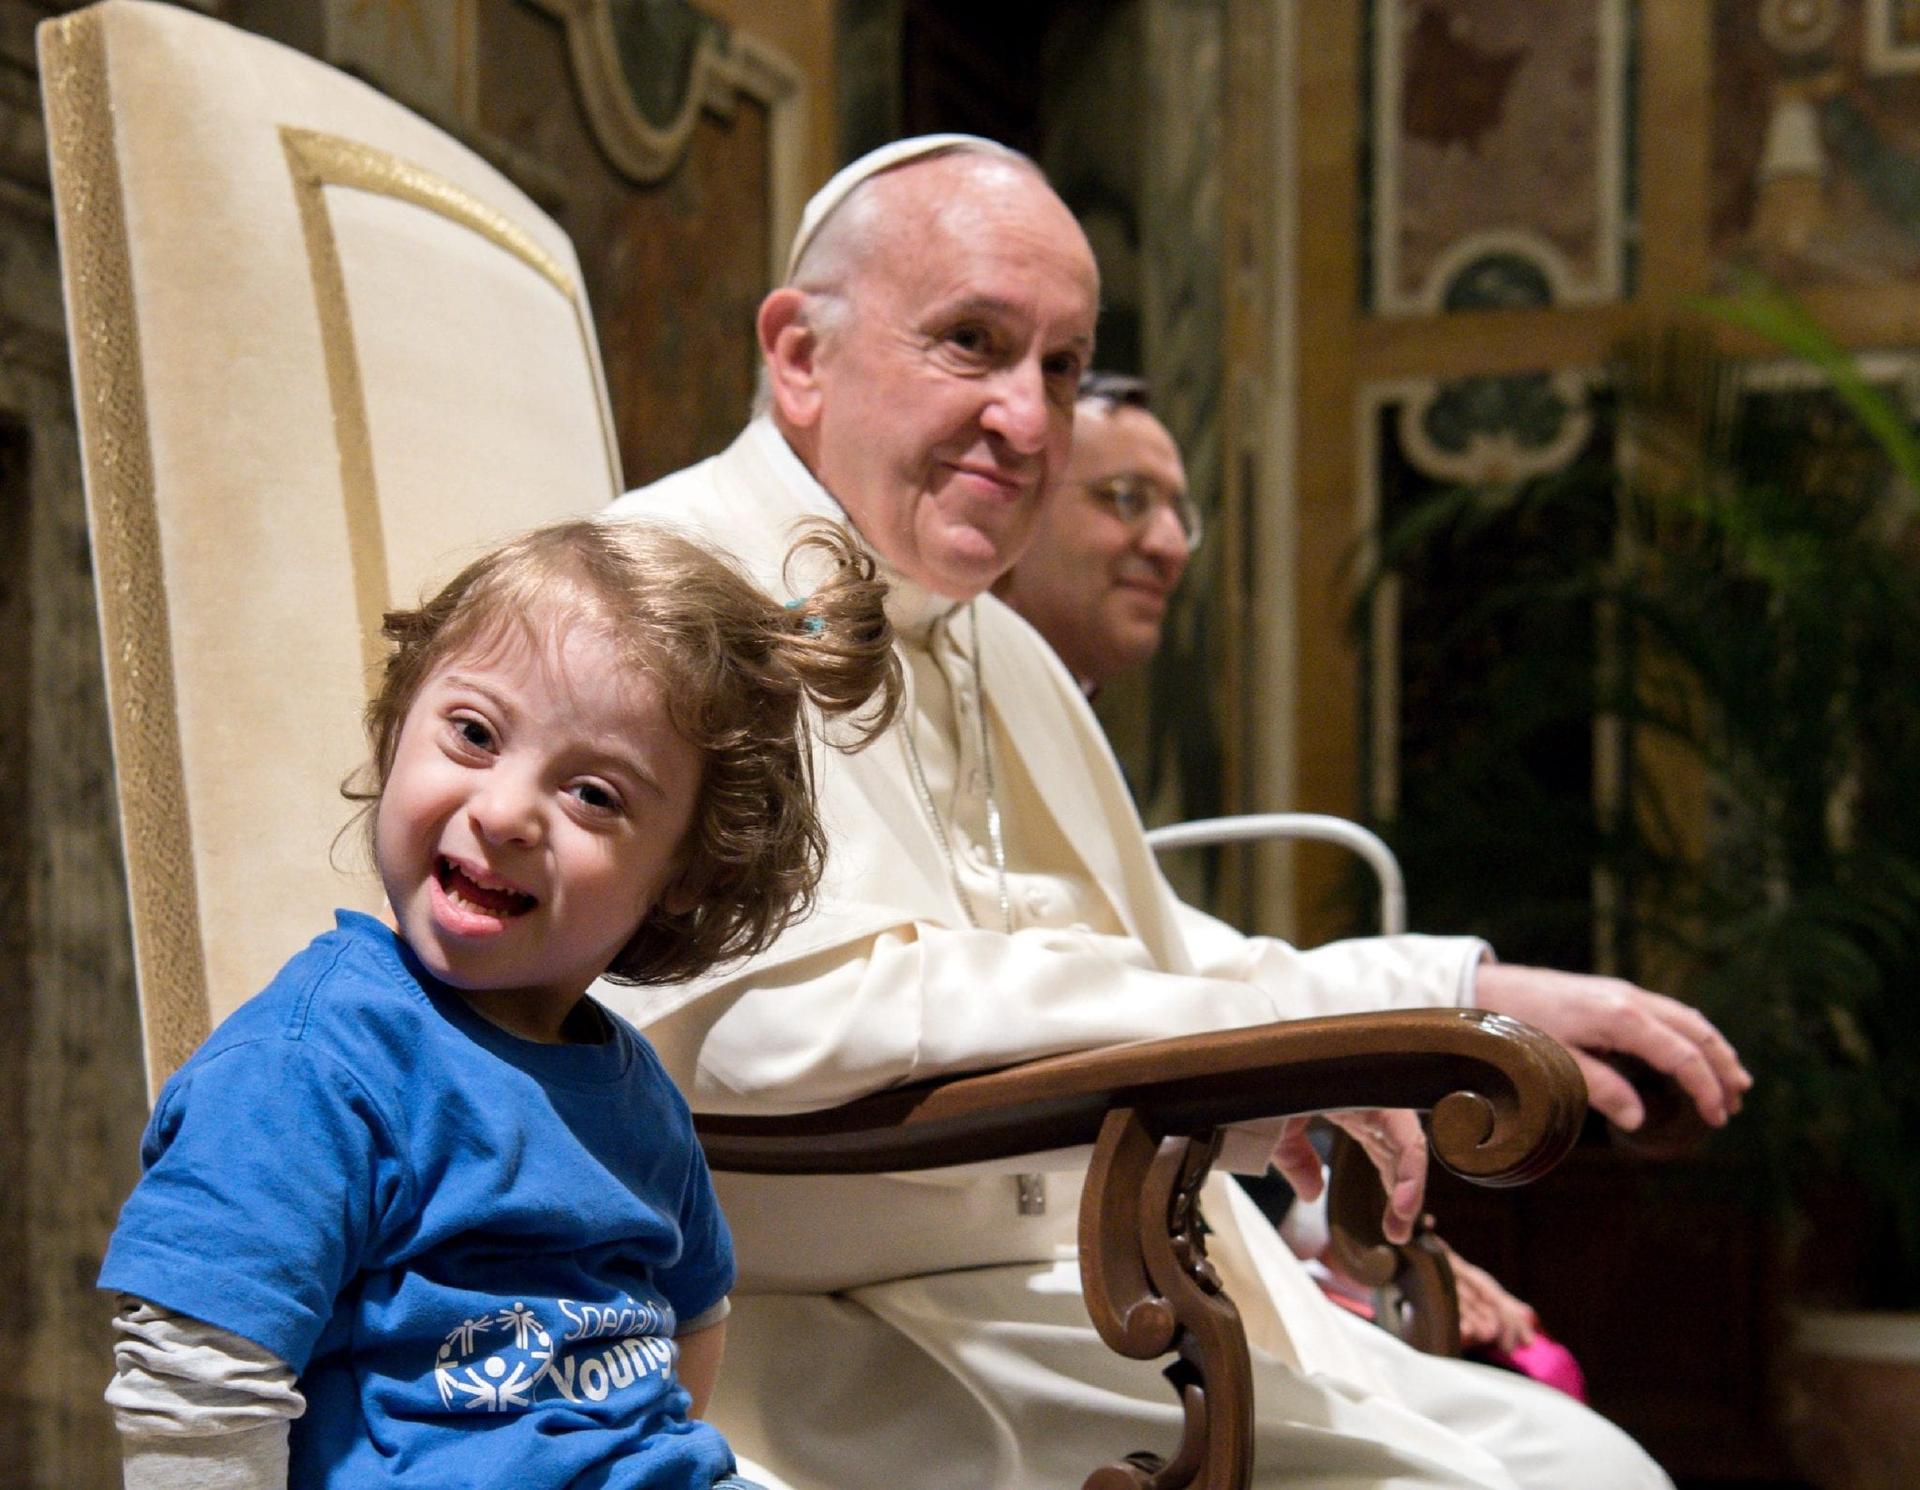 Rome conference fears Down syndrome may be in final generation